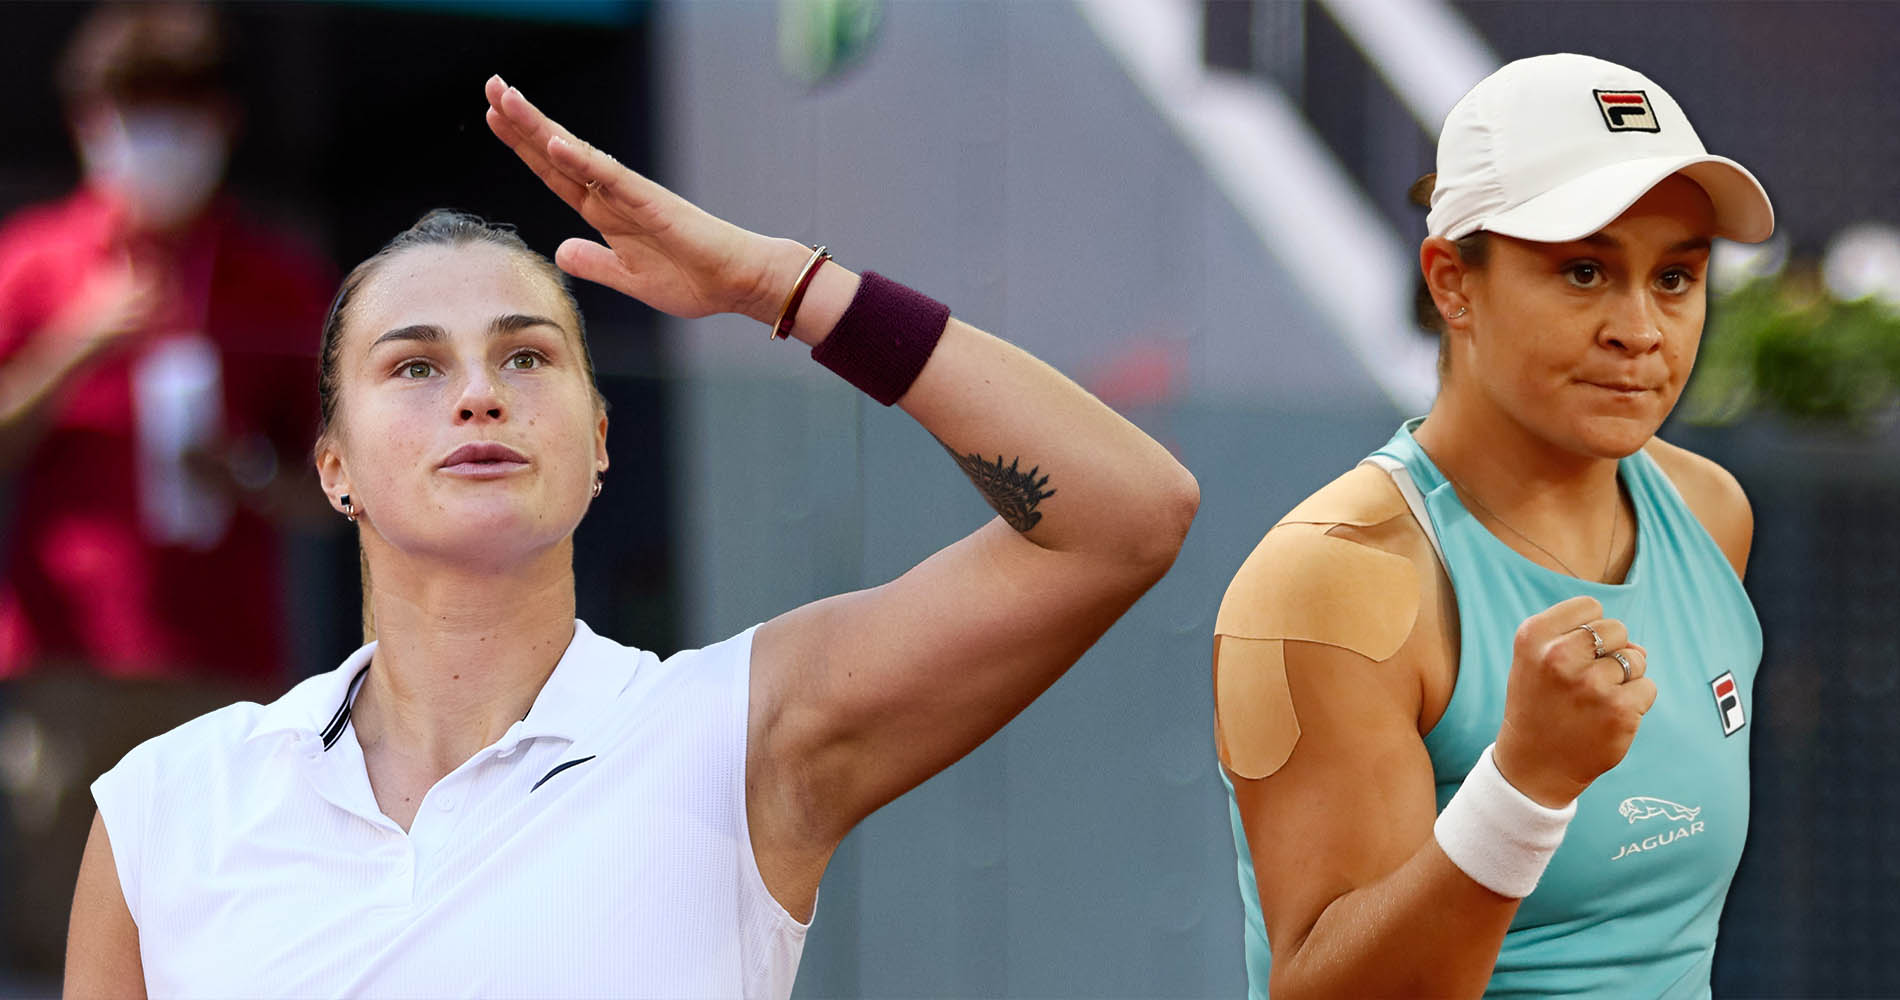 Barty V Sabalenka The Wta S Two Hottest Players In The Madrid Final. 